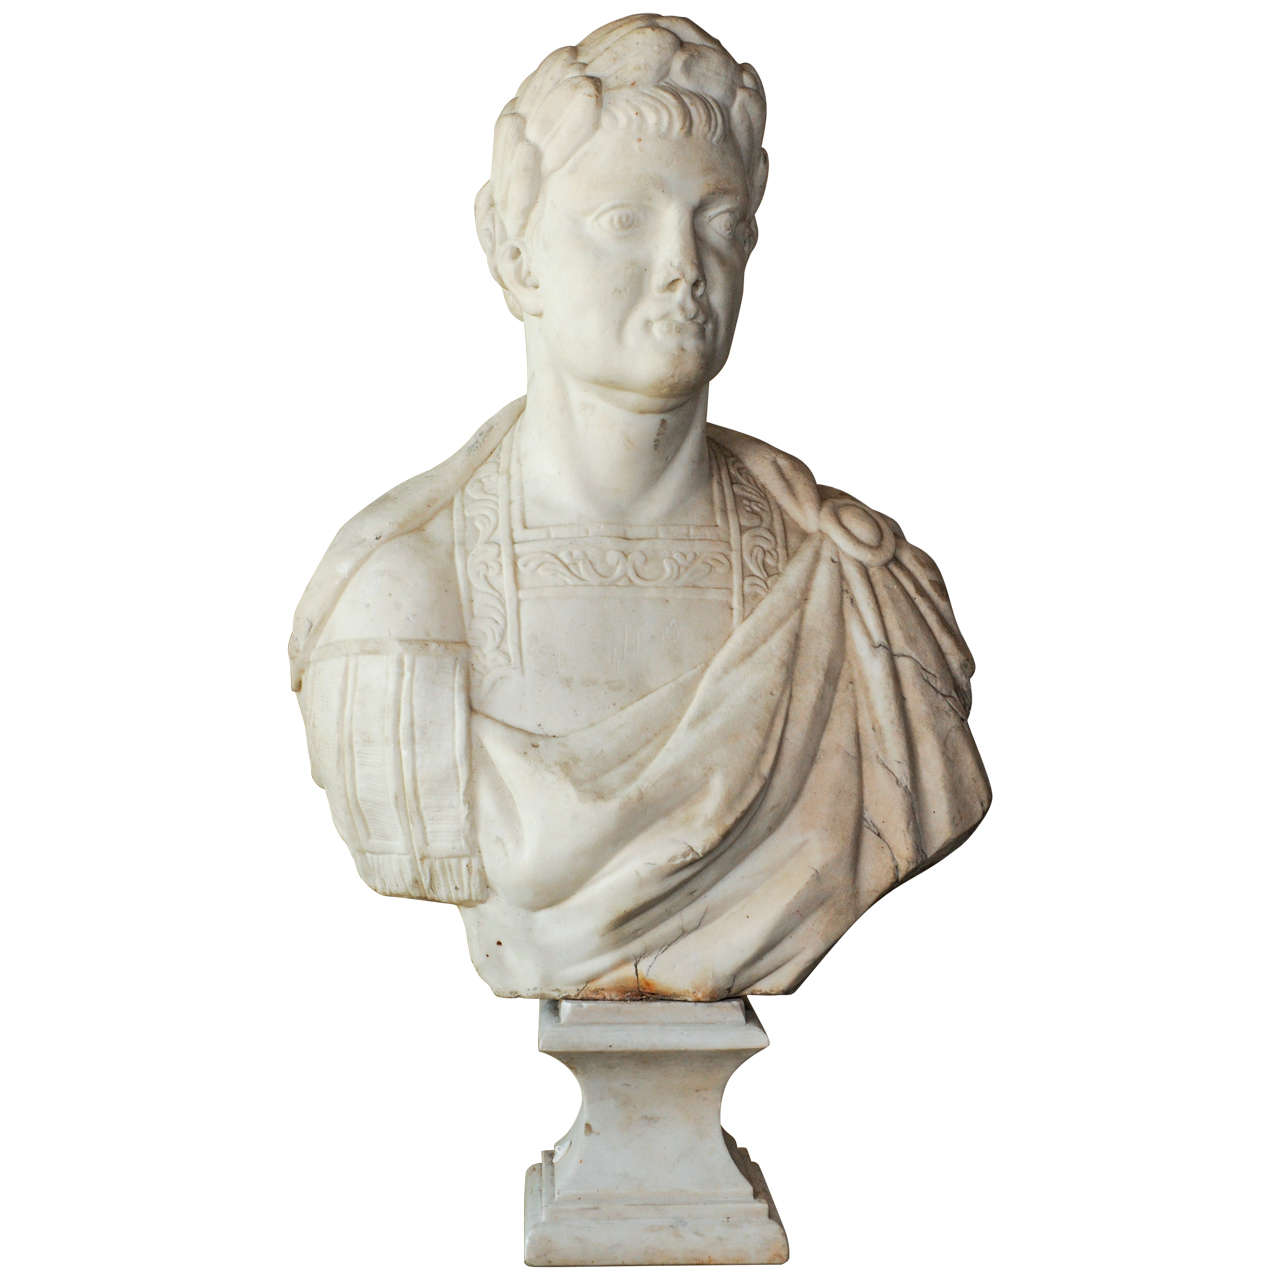 A 17th century marble bust of an emperor